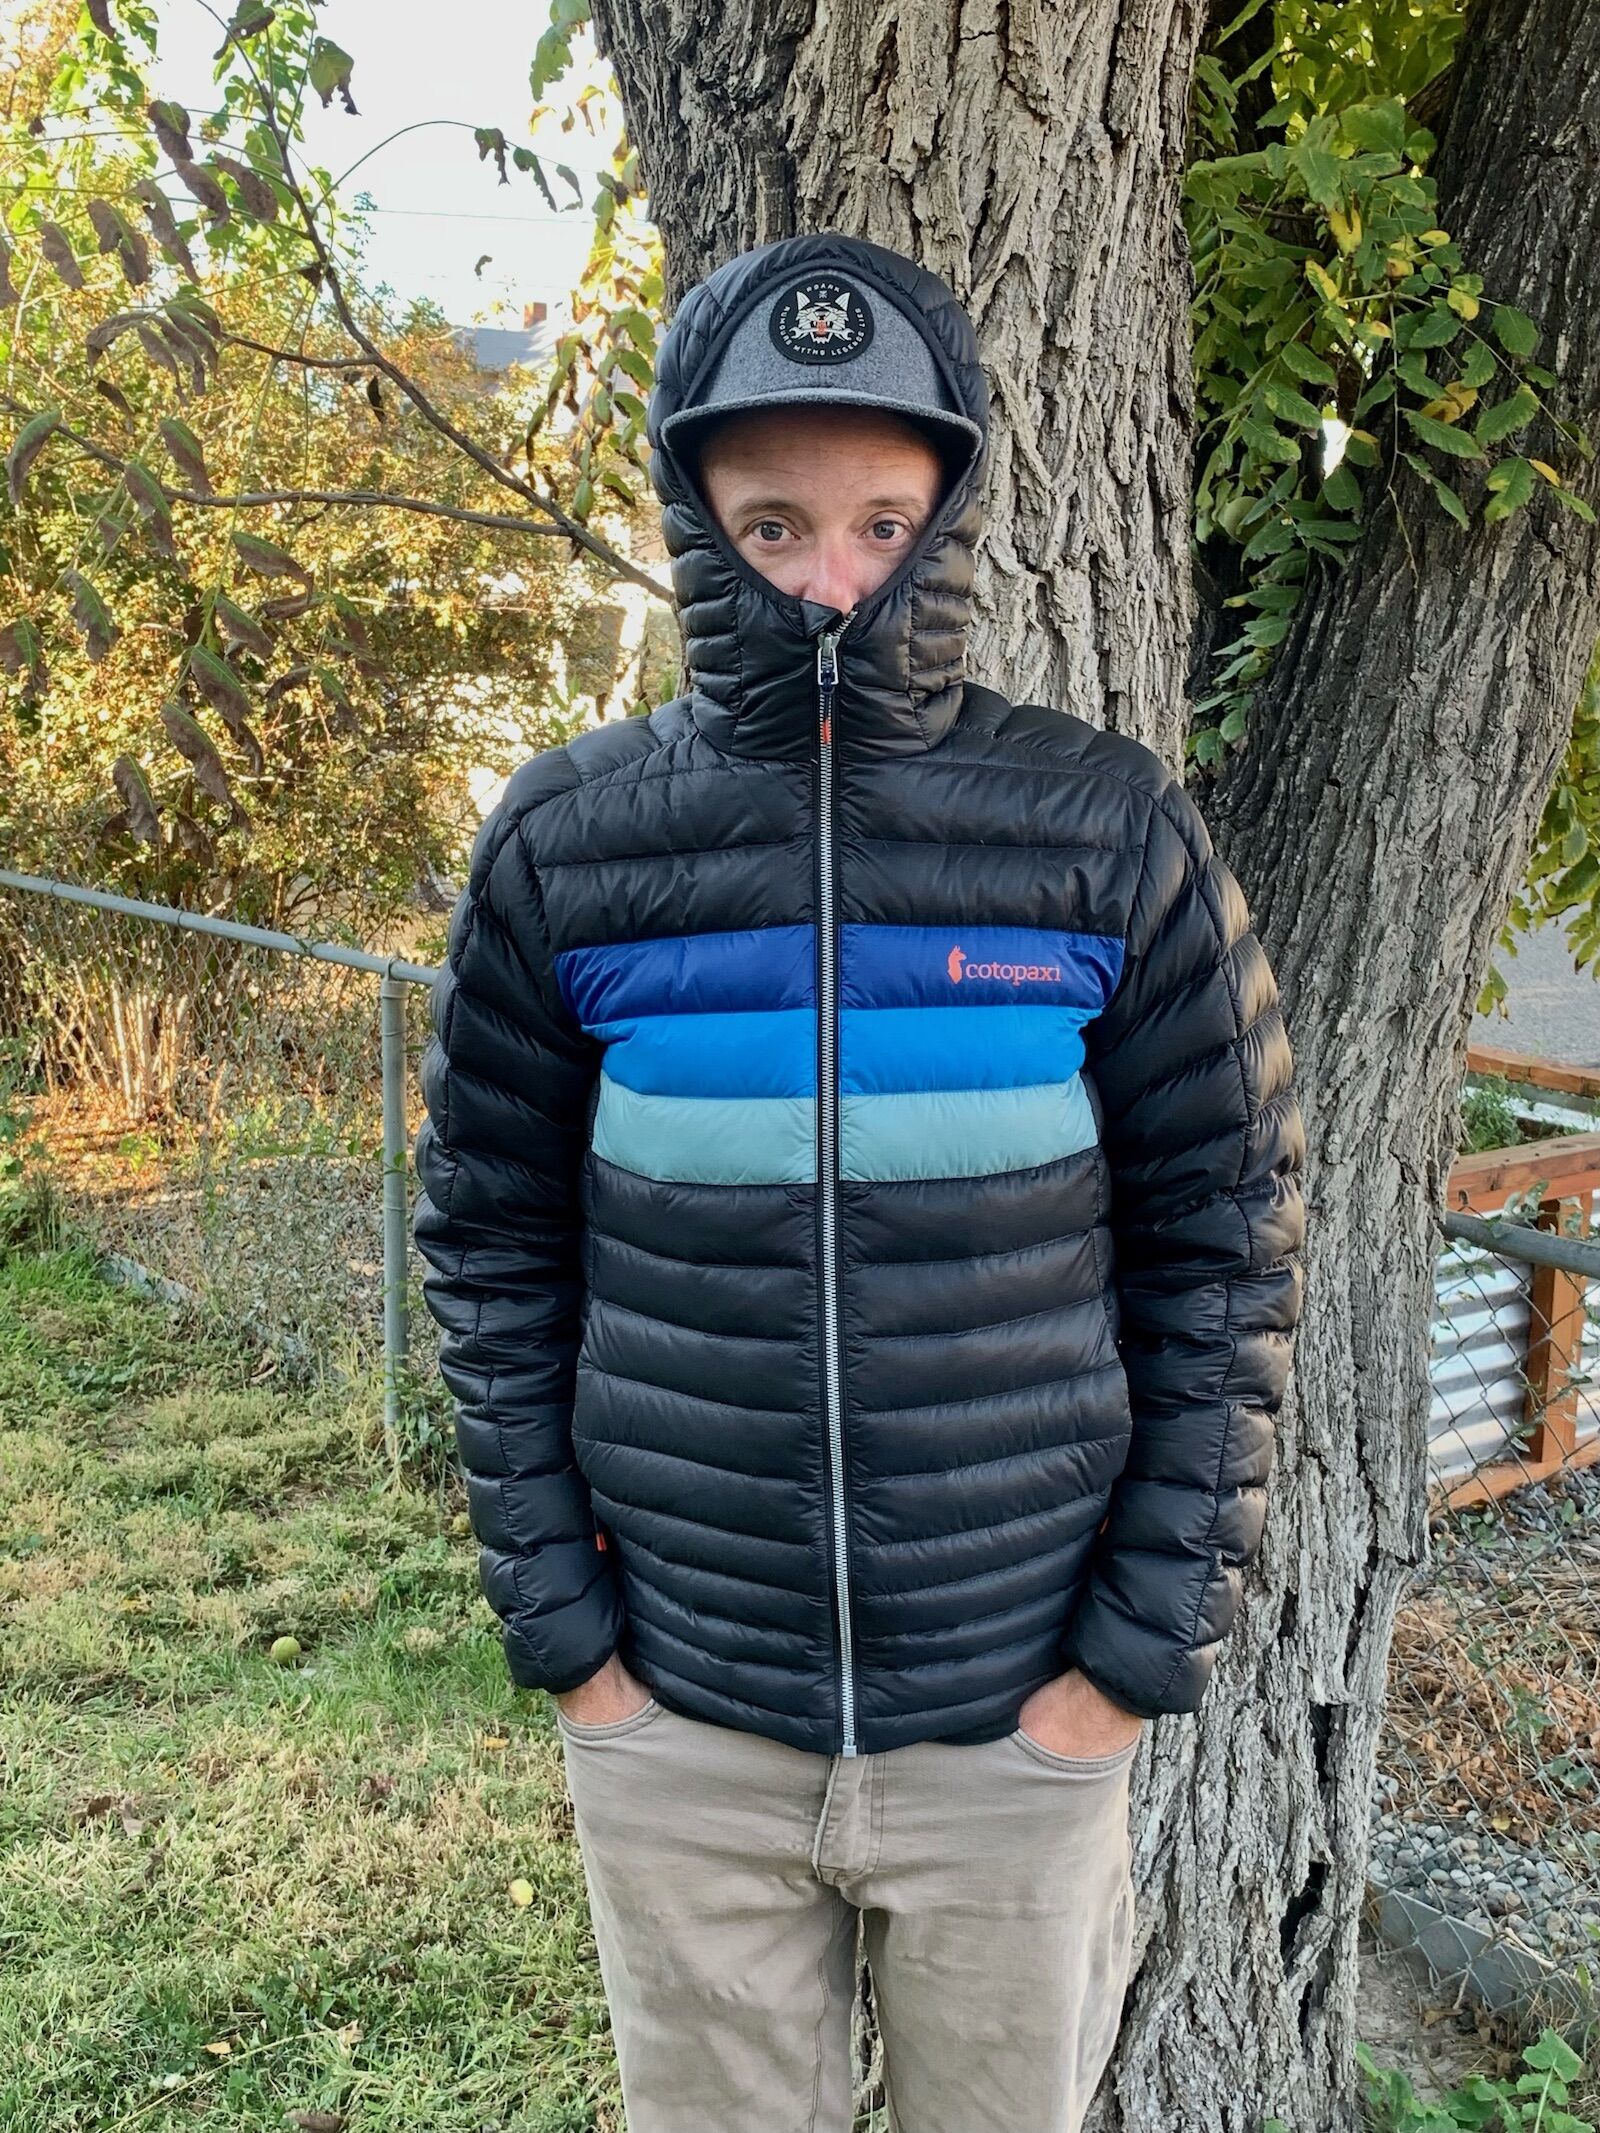 Cotopaxi Fuego Down Jacket Review: The Most Durable and Versatile Jacket